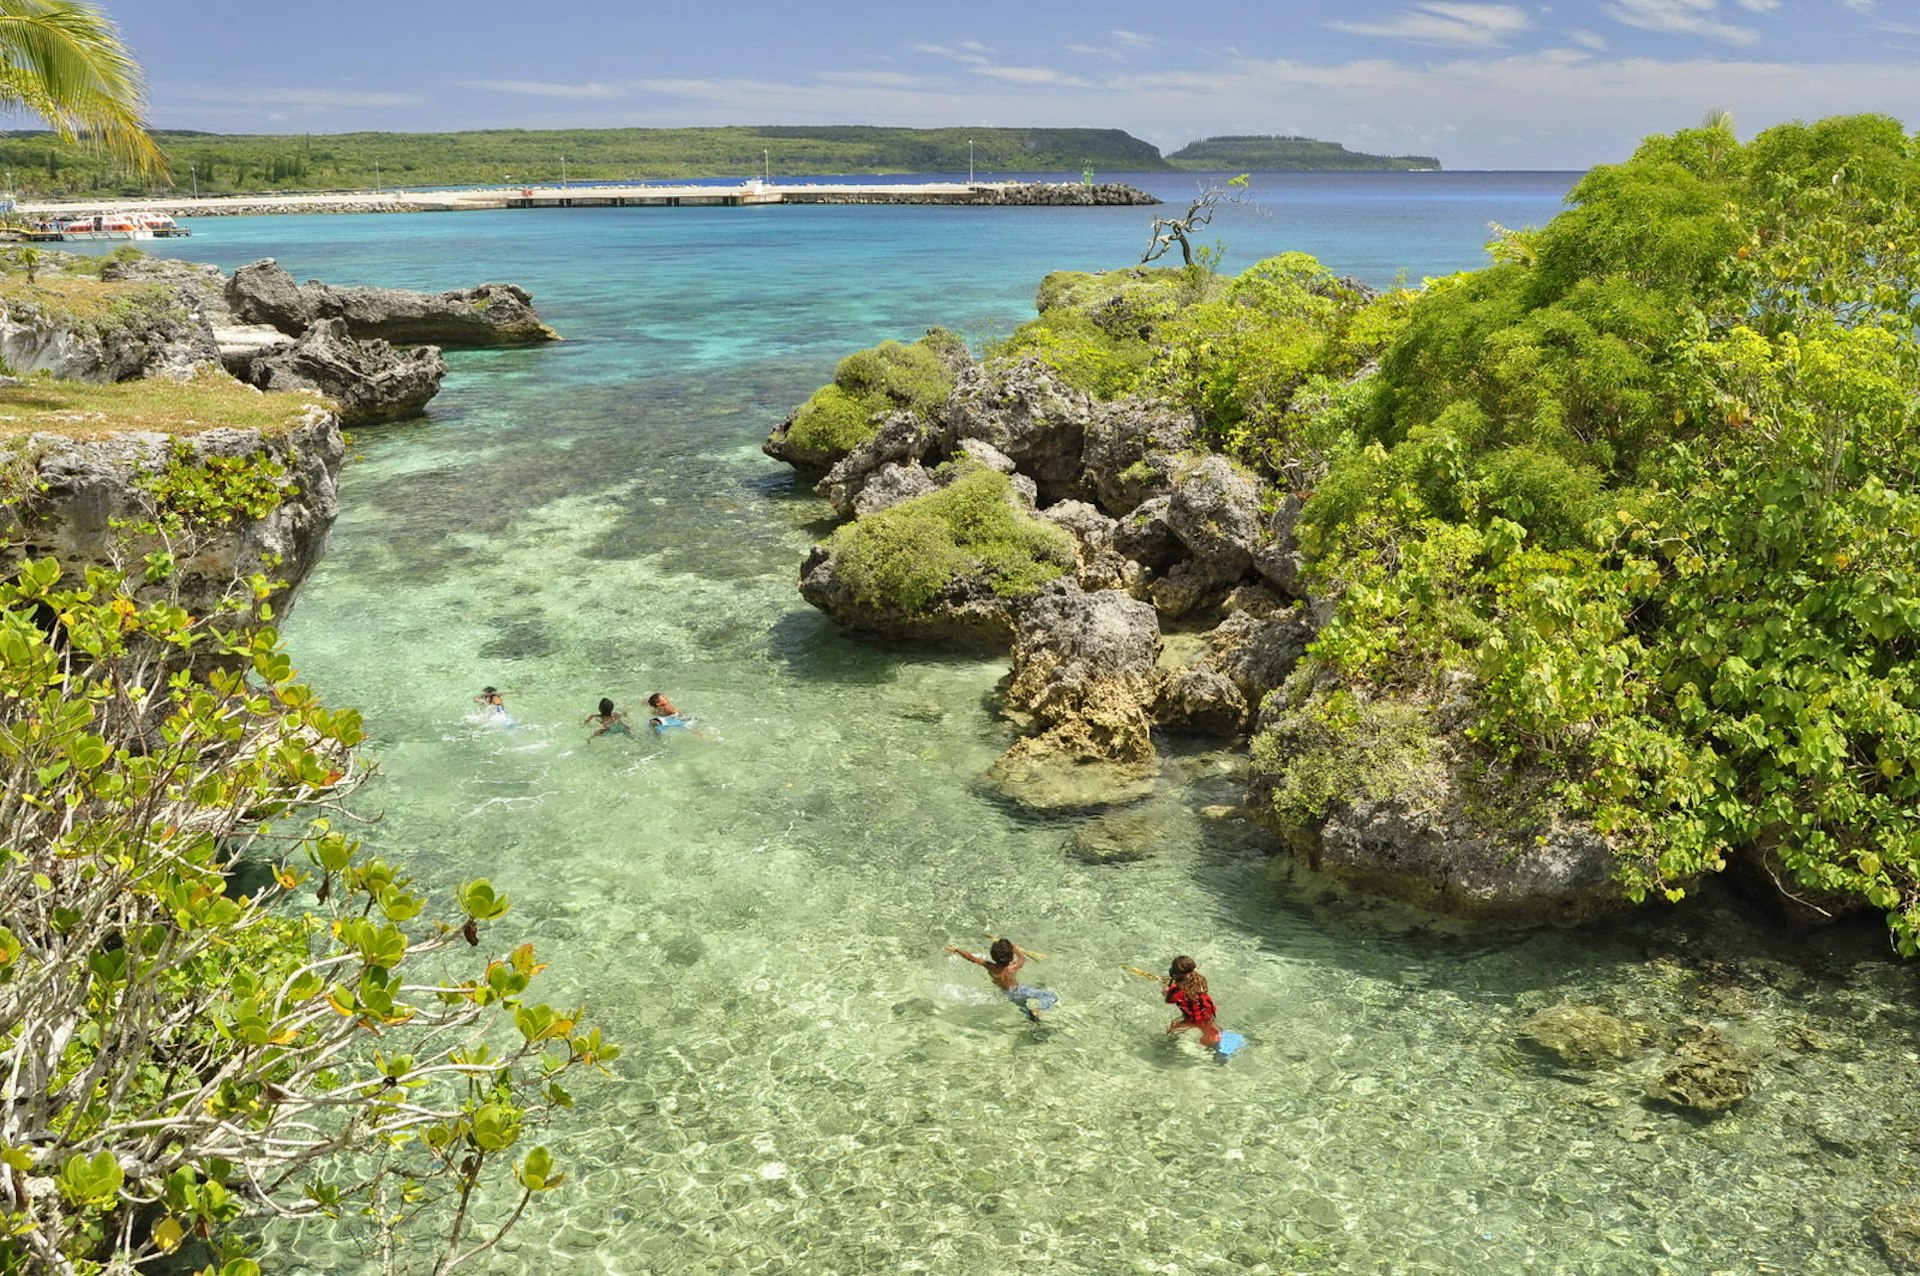 Lagoon on Mare Island, New Caledonia. There are several people paddling in the clear water. Either side of the lagoon are hulking grey rocks topped with vibrant green plants and moss. 